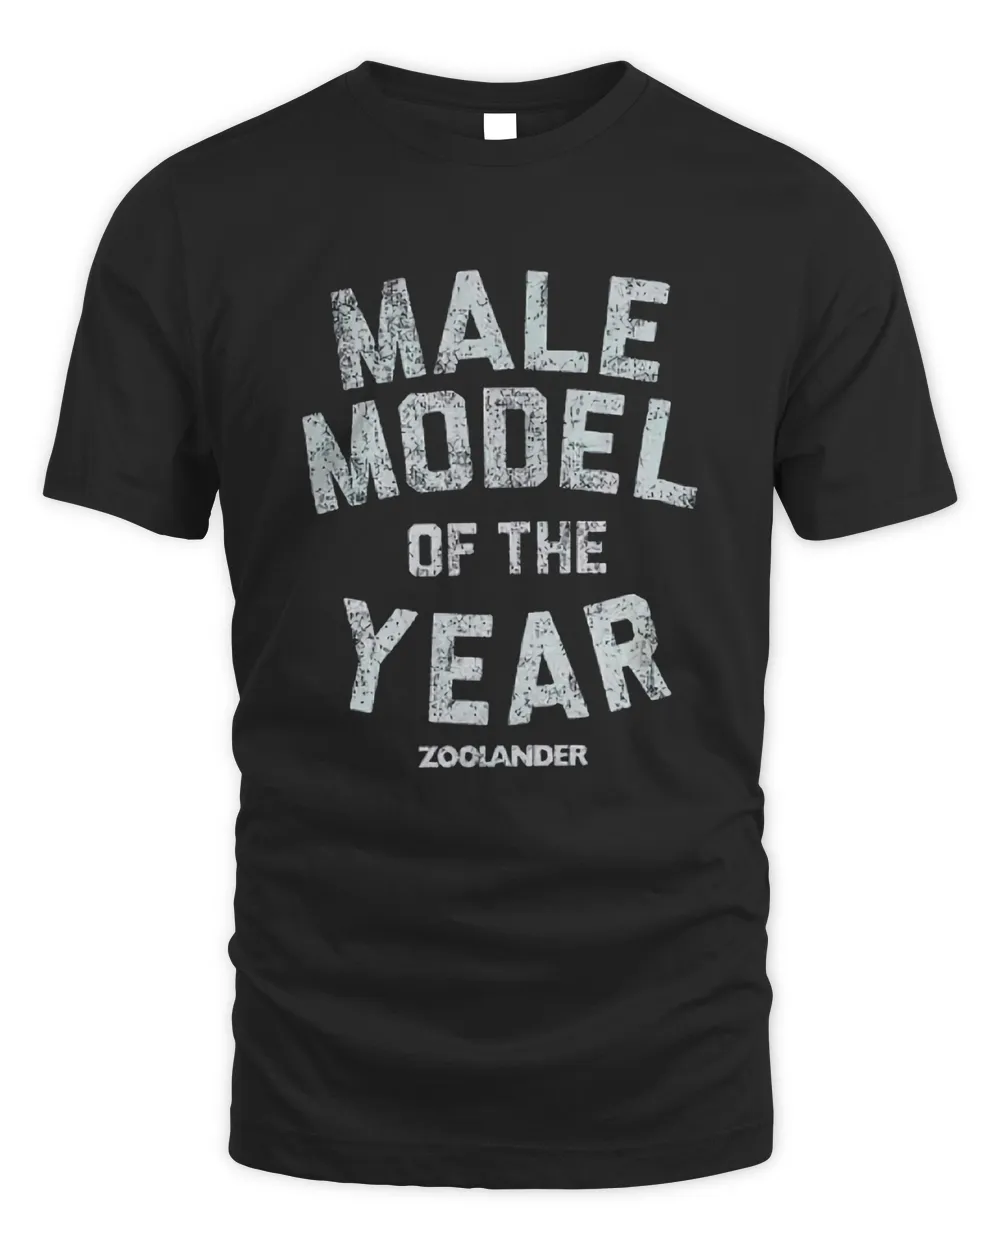 Male Model Of The Year Graphic Basic Casual Short T-Shirt